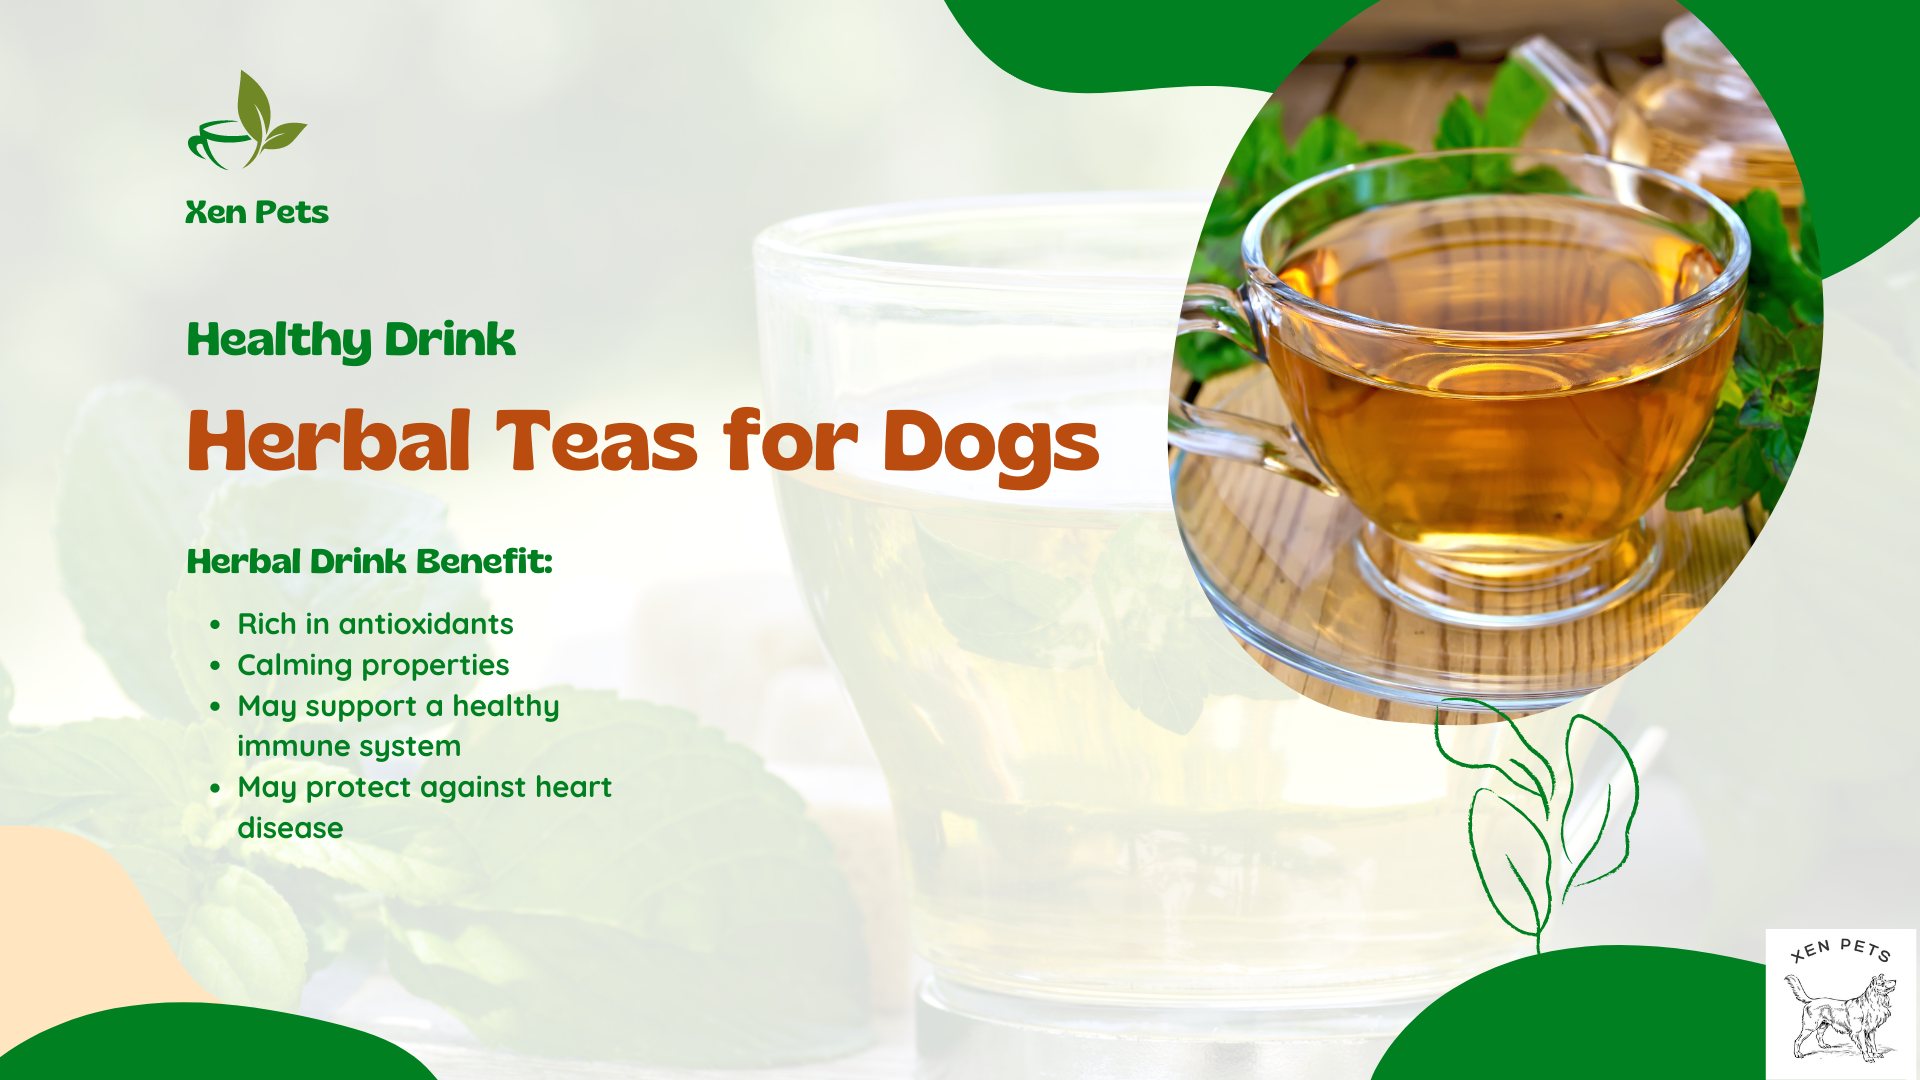 Xen Pets herbal teas for dogs